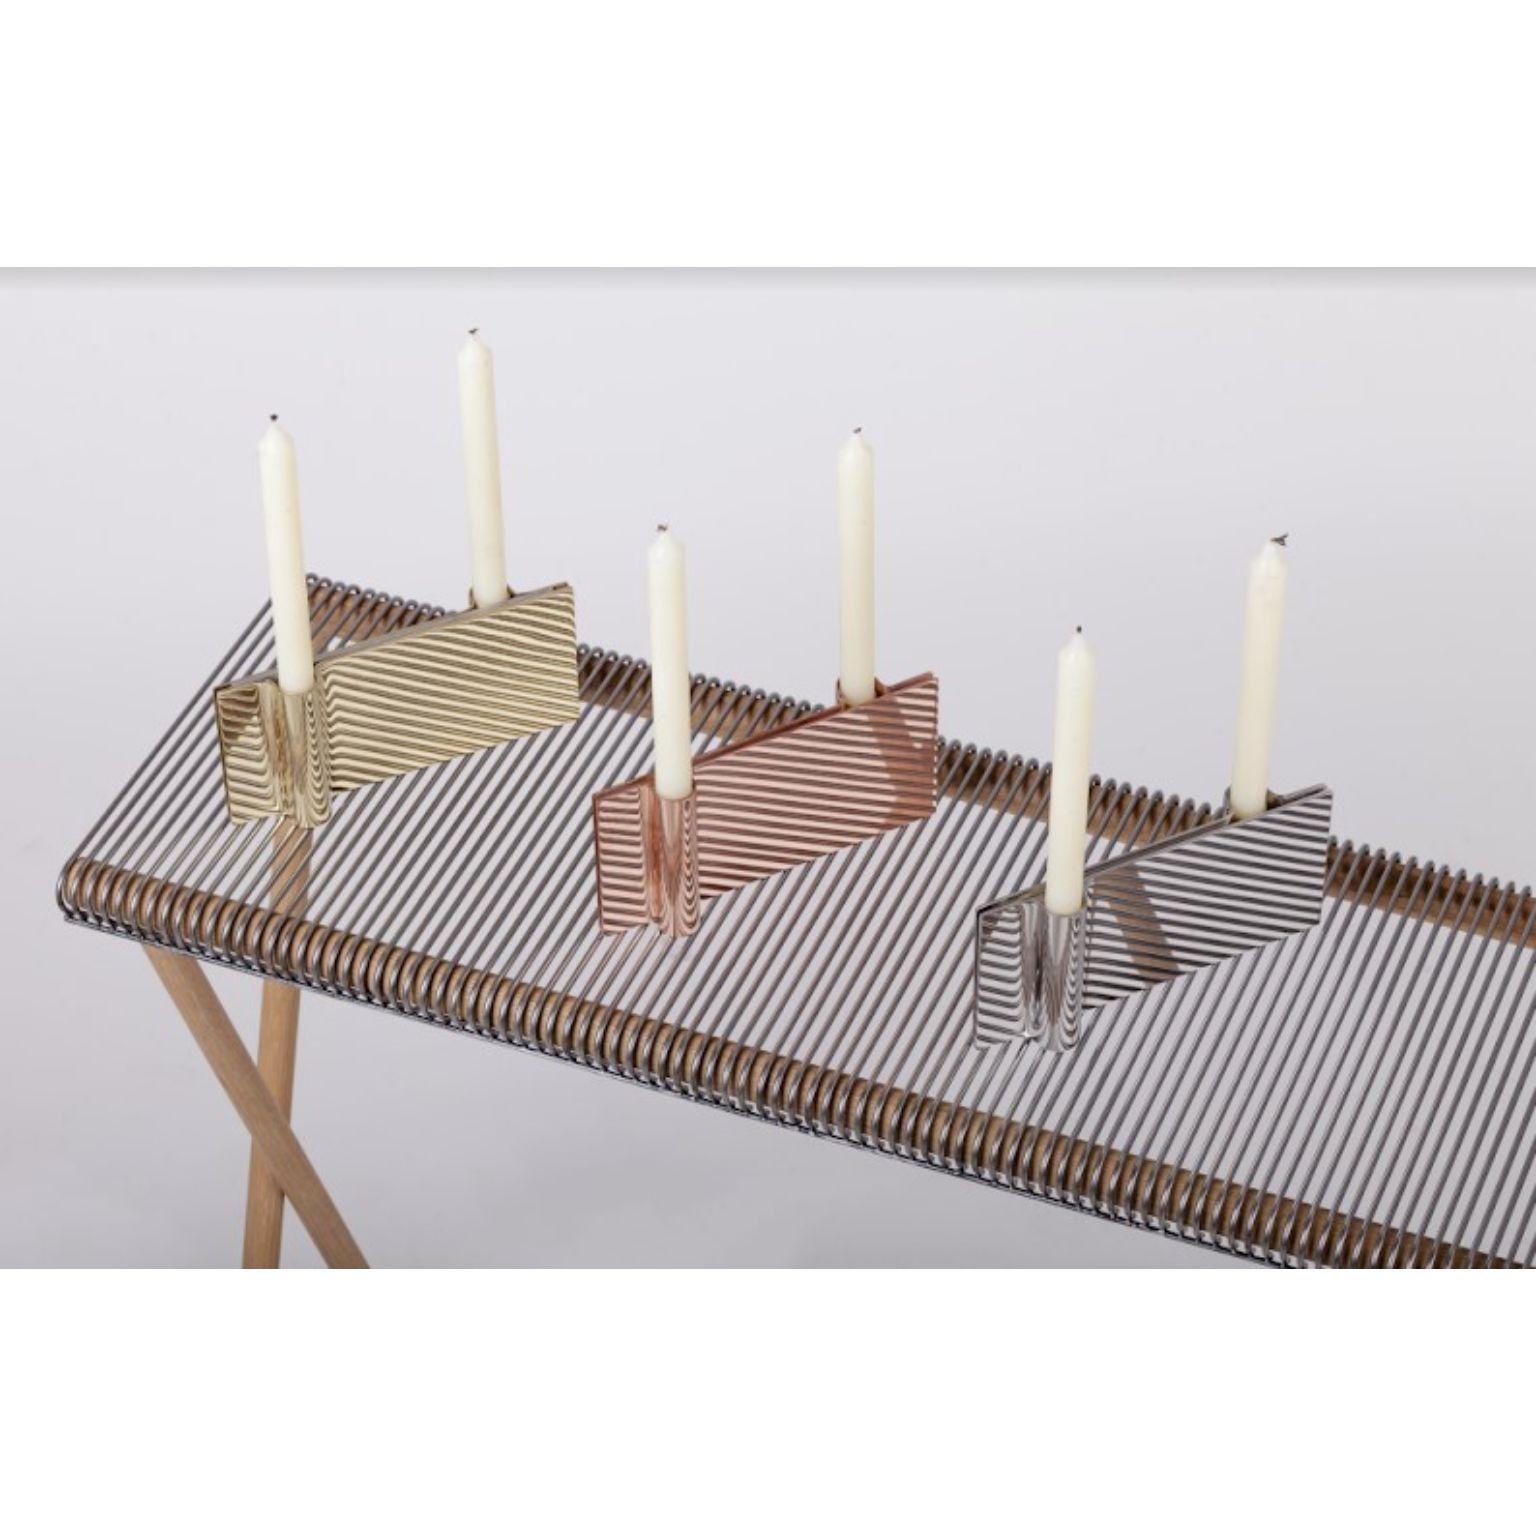 Stainless Steel Folio Steel Candle Holder by Mingardo For Sale